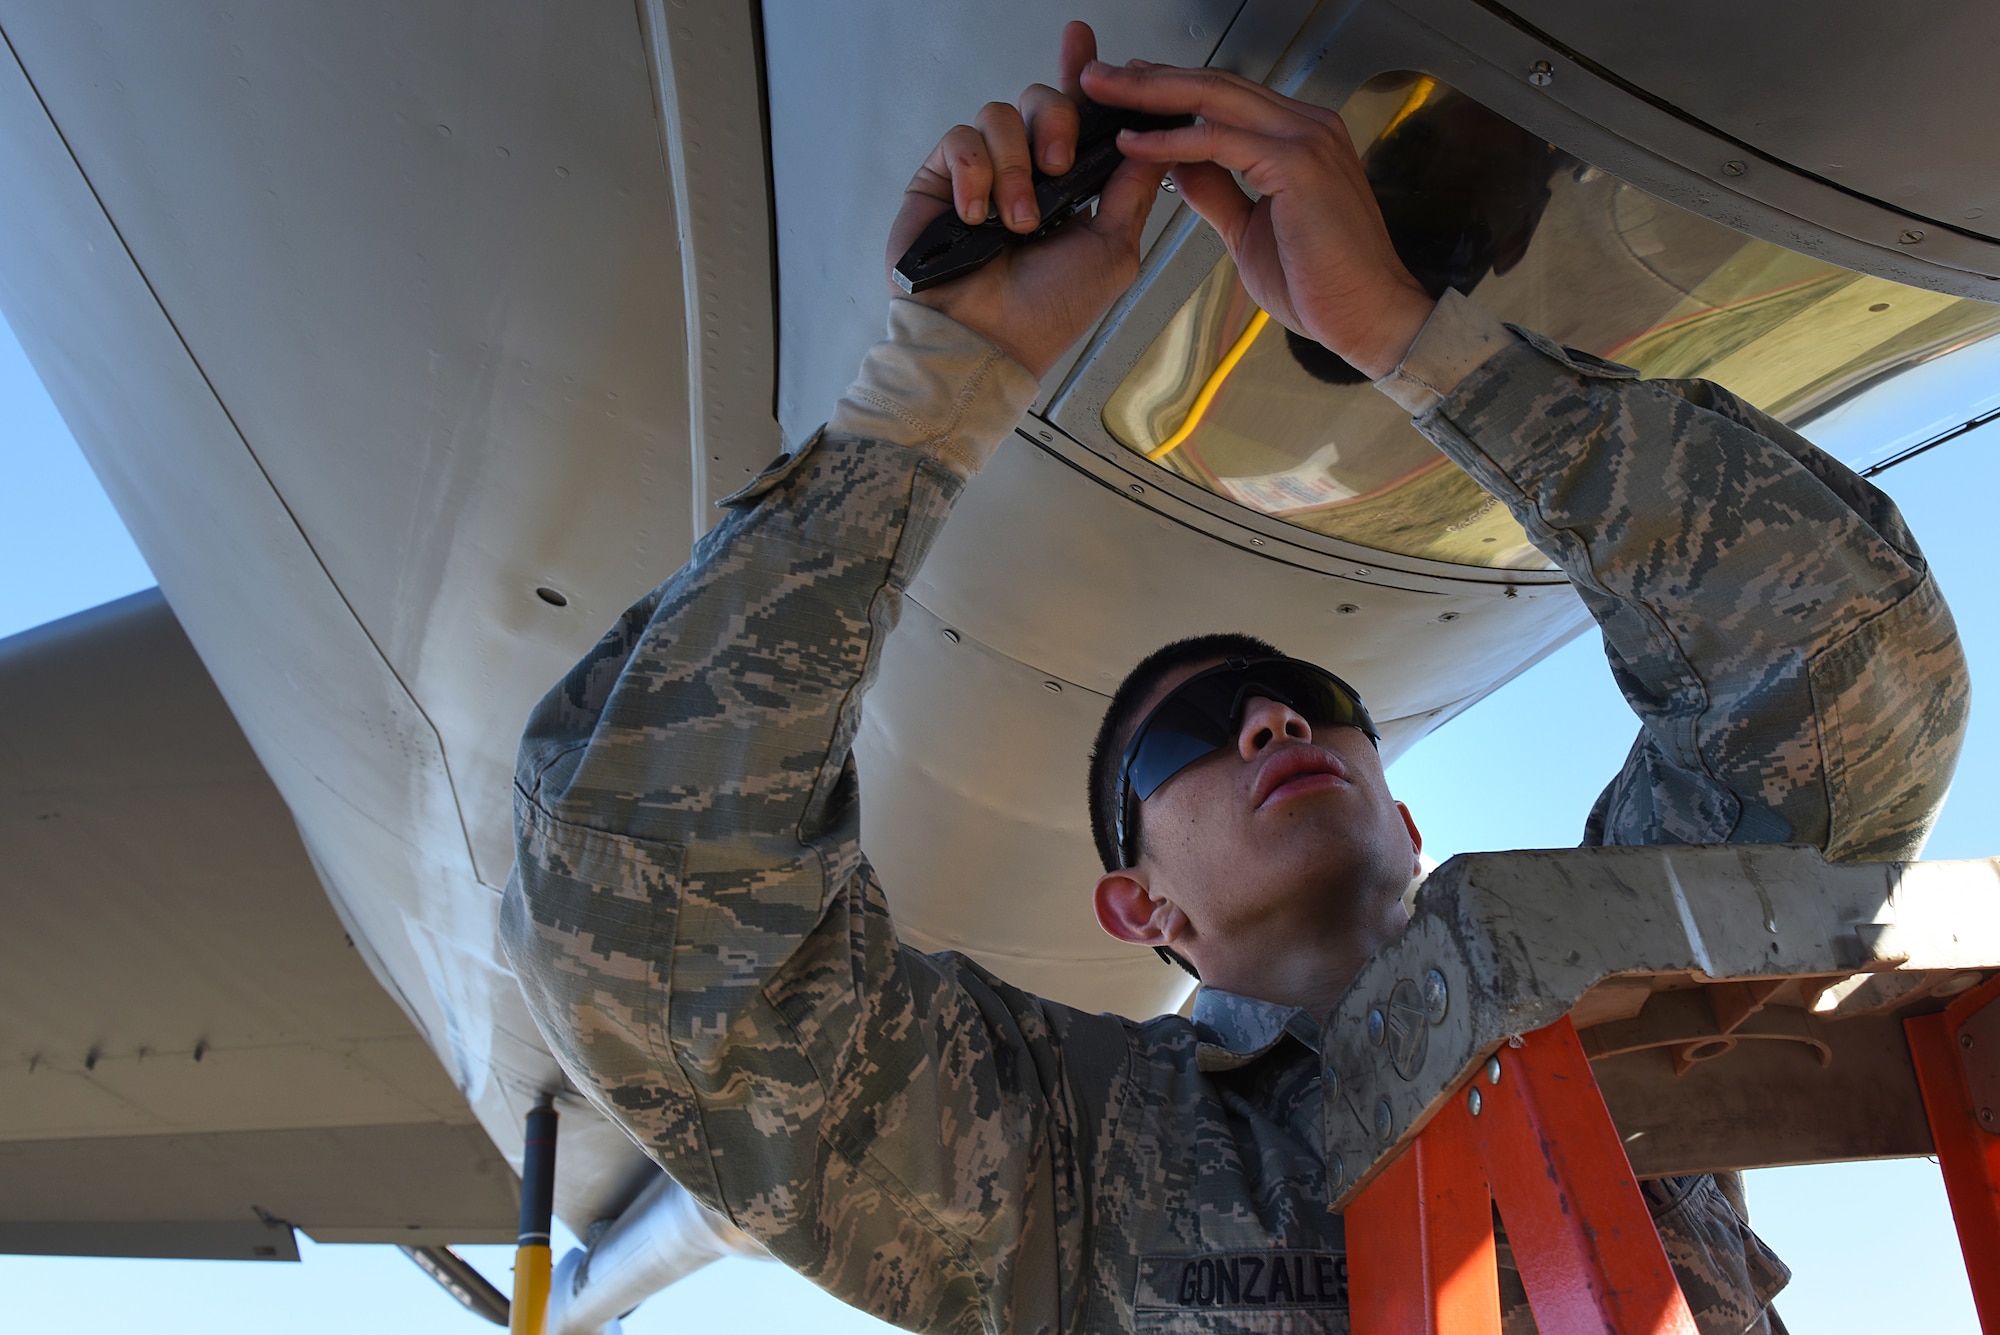 U.S. Air Force Airman 1st Class Richard Gonzales, 22nd Expeditionary Aircraft Maintenance Unit KC-135 Stratotanker crew chief, replaces a boom sighting window at Incirlik Air Base, Turkey, Nov. 15, 2018.